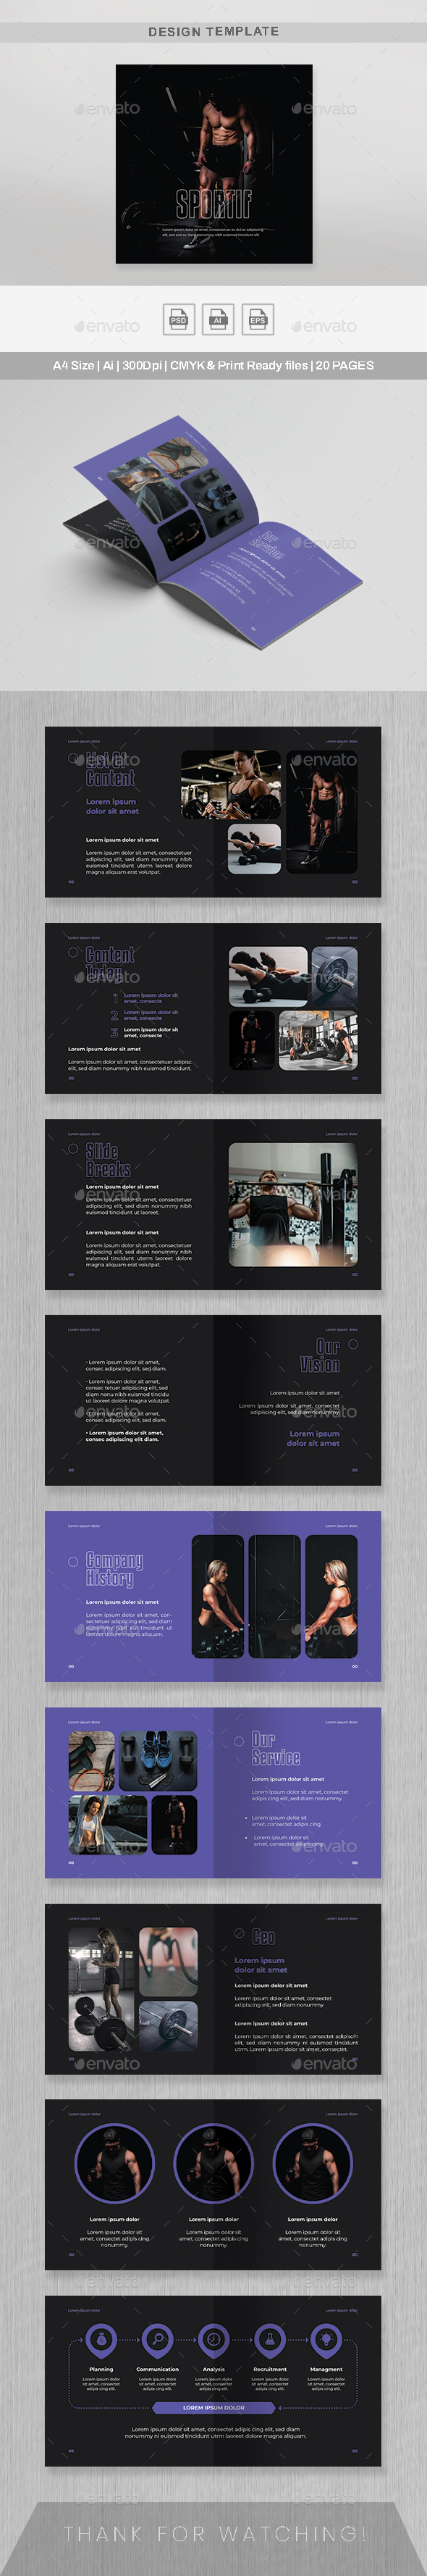 [DOWNLOAD]Square Gym and Fitness Company Profile Brochure